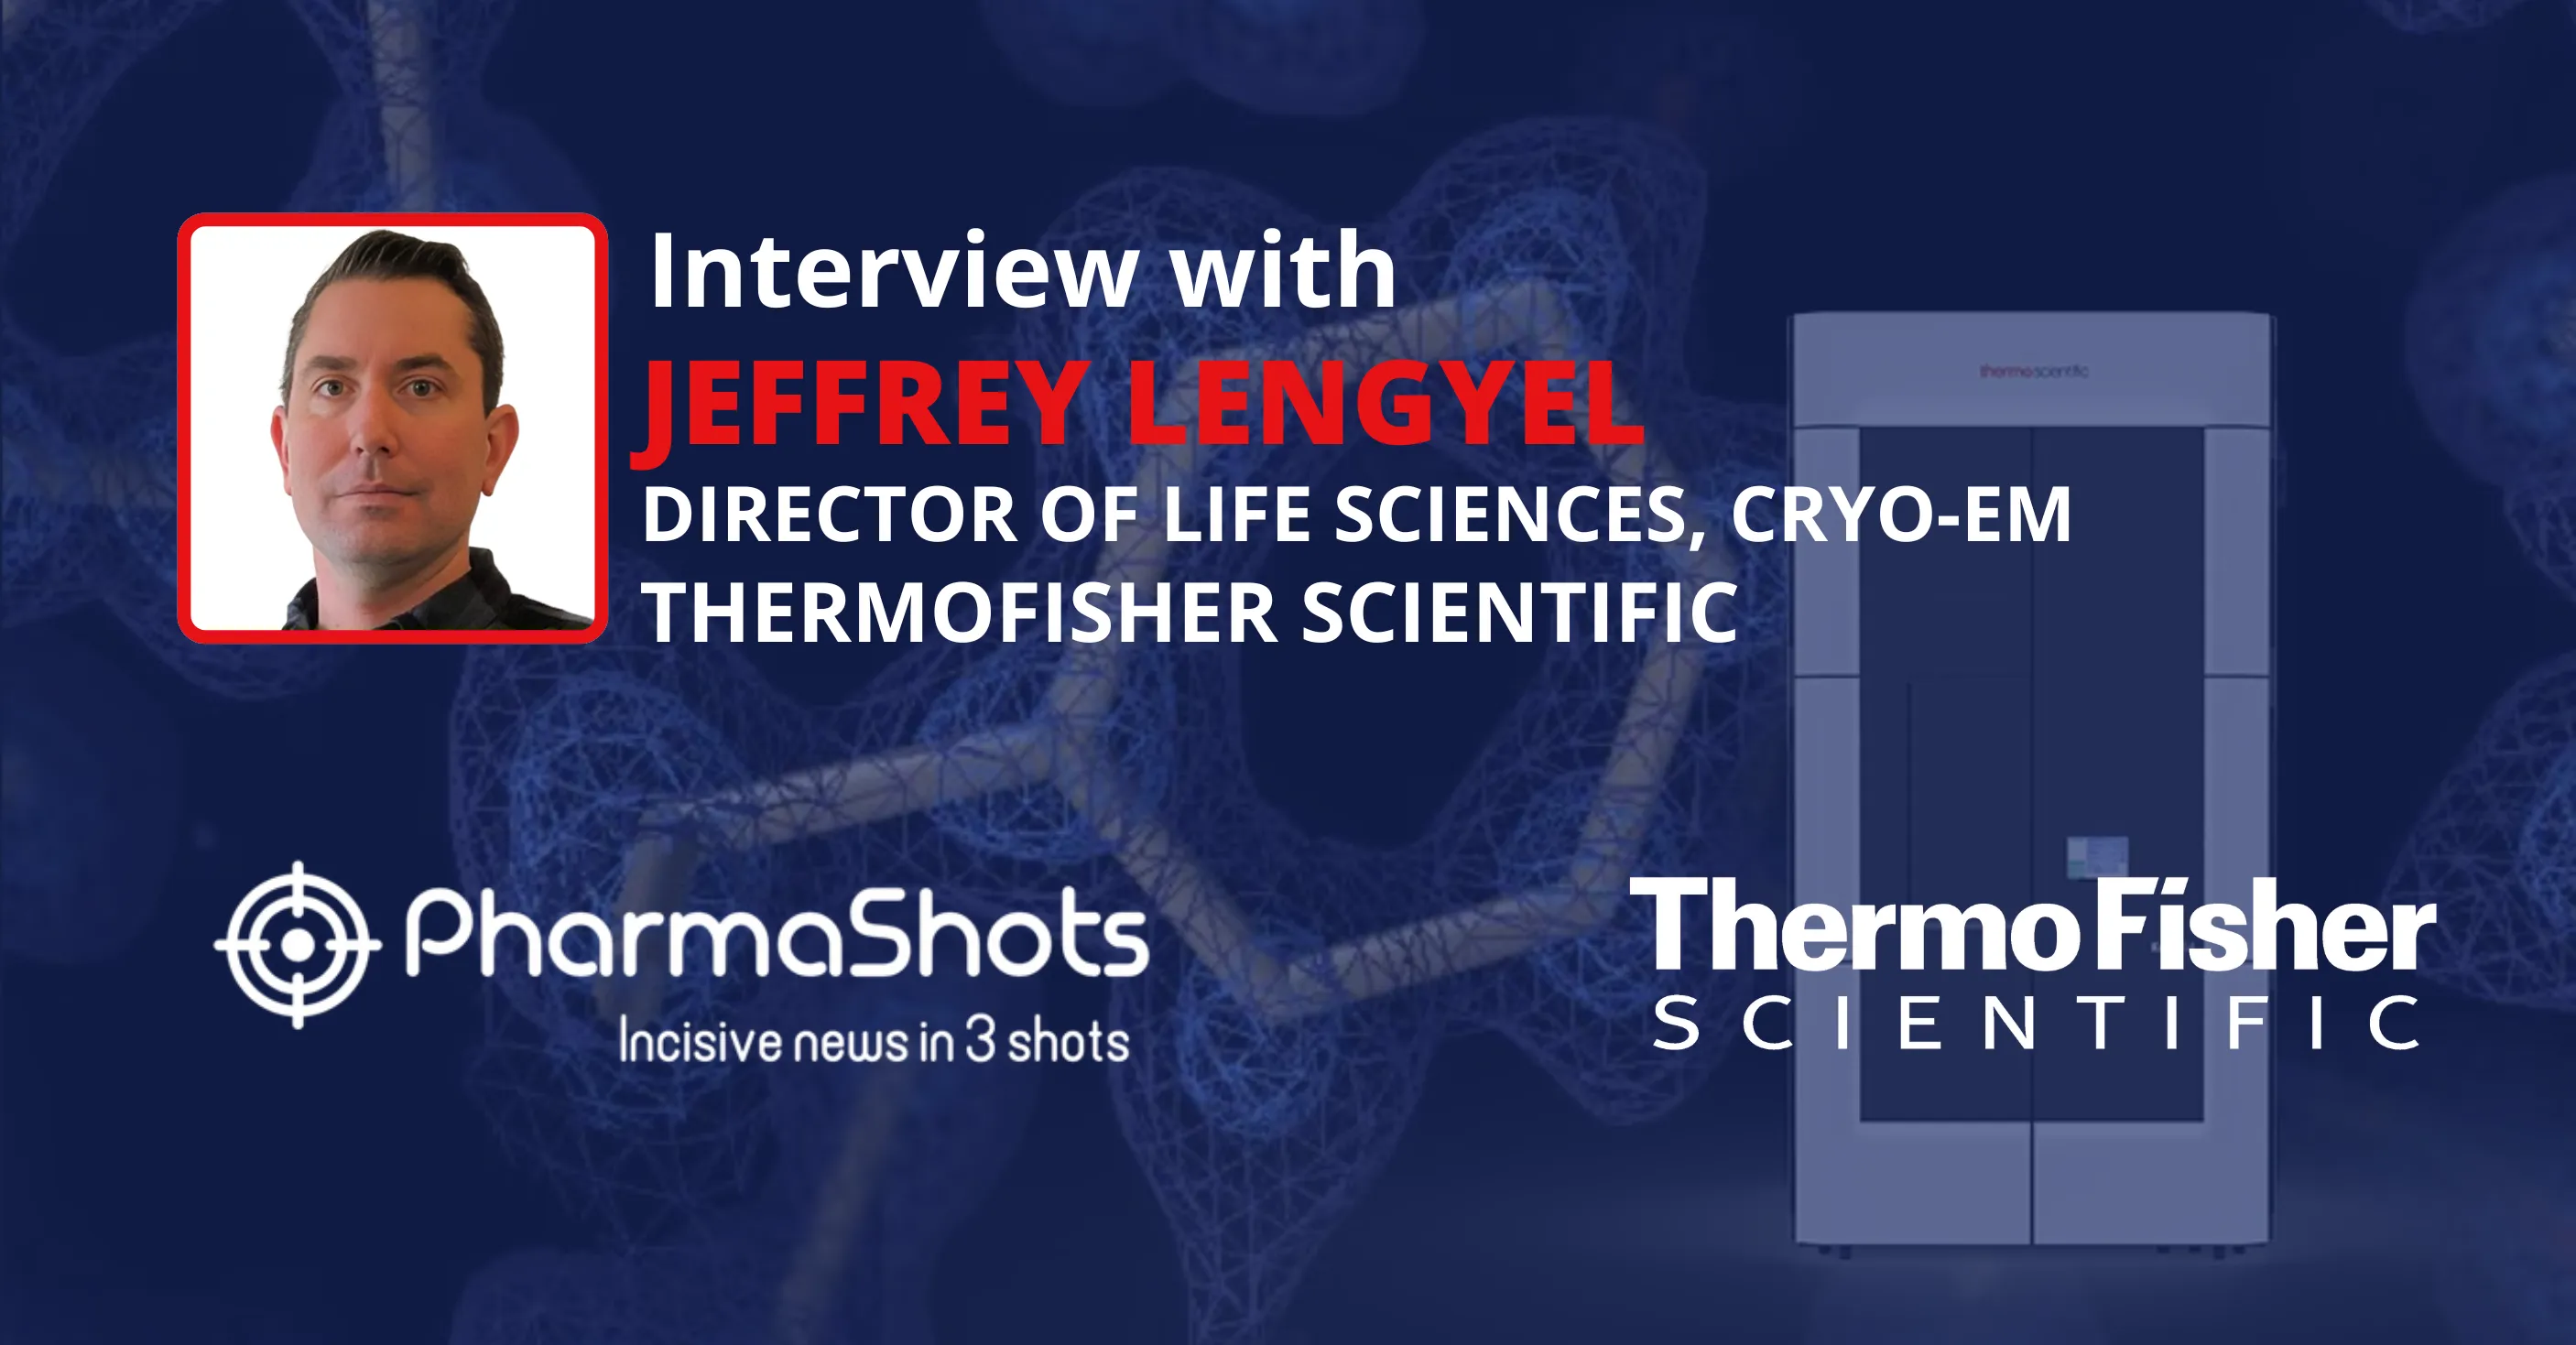 Increasing Accessibility: Jeffrey Lengyel from Thermo Fisher Scientific, in an Enlightening Conversation with PharmaShots